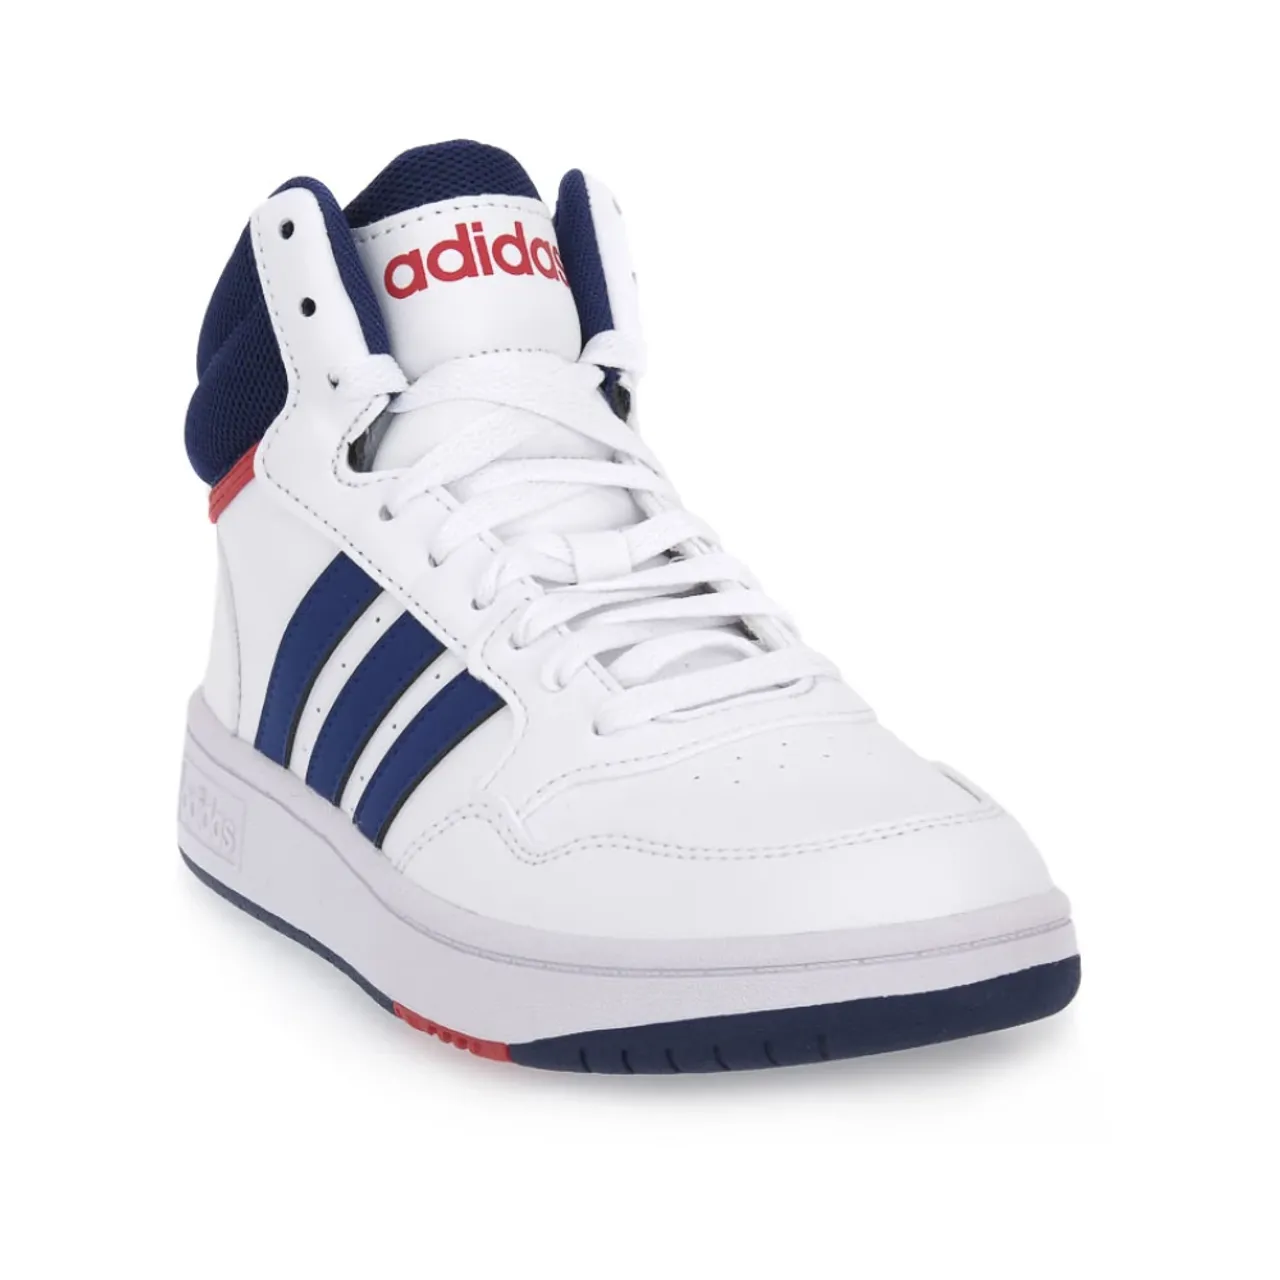 Adidas , Hoops 3 MID Kids ,White male, Sizes: